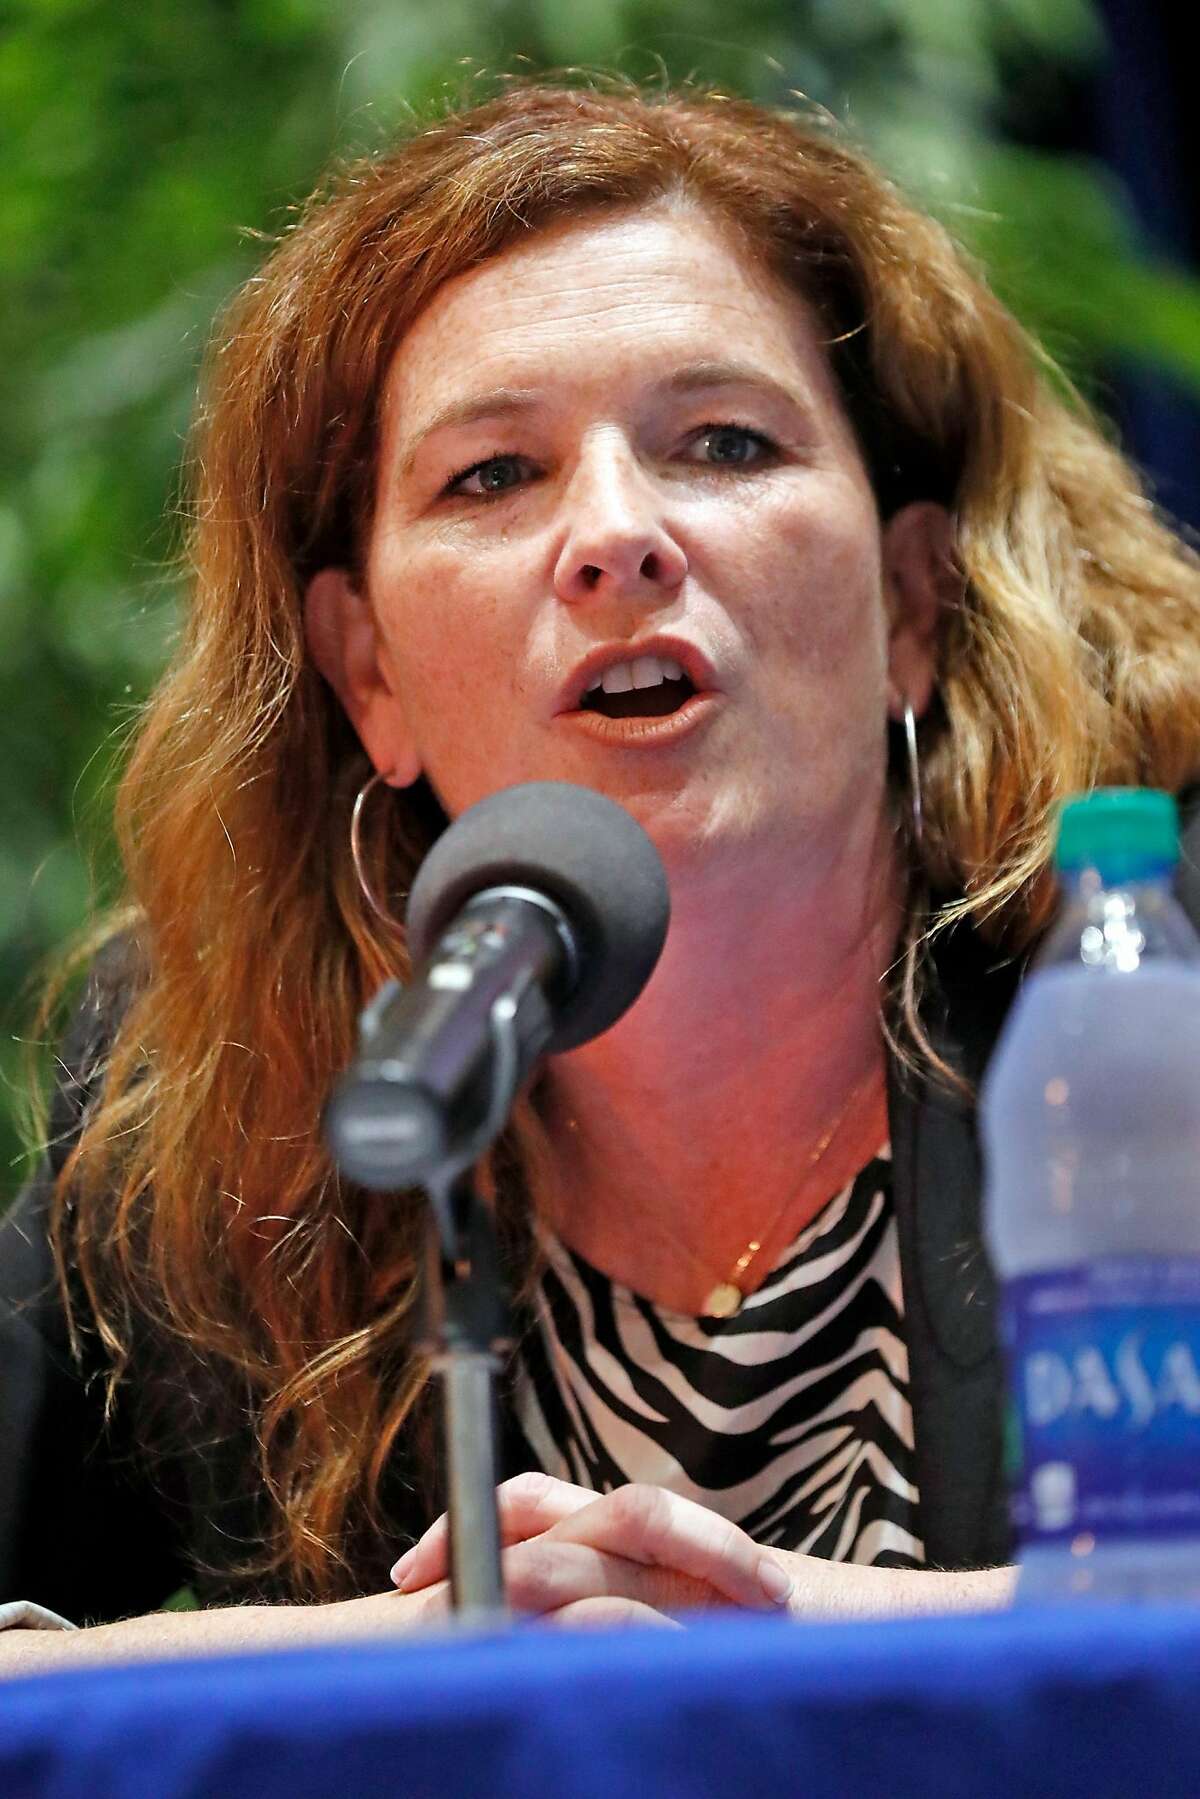 Suzy Loftus during San Francisco District Attorney debate at UC Hastings School of Law in San Francisco, Calif., on Tuesday, August 6, 2019.